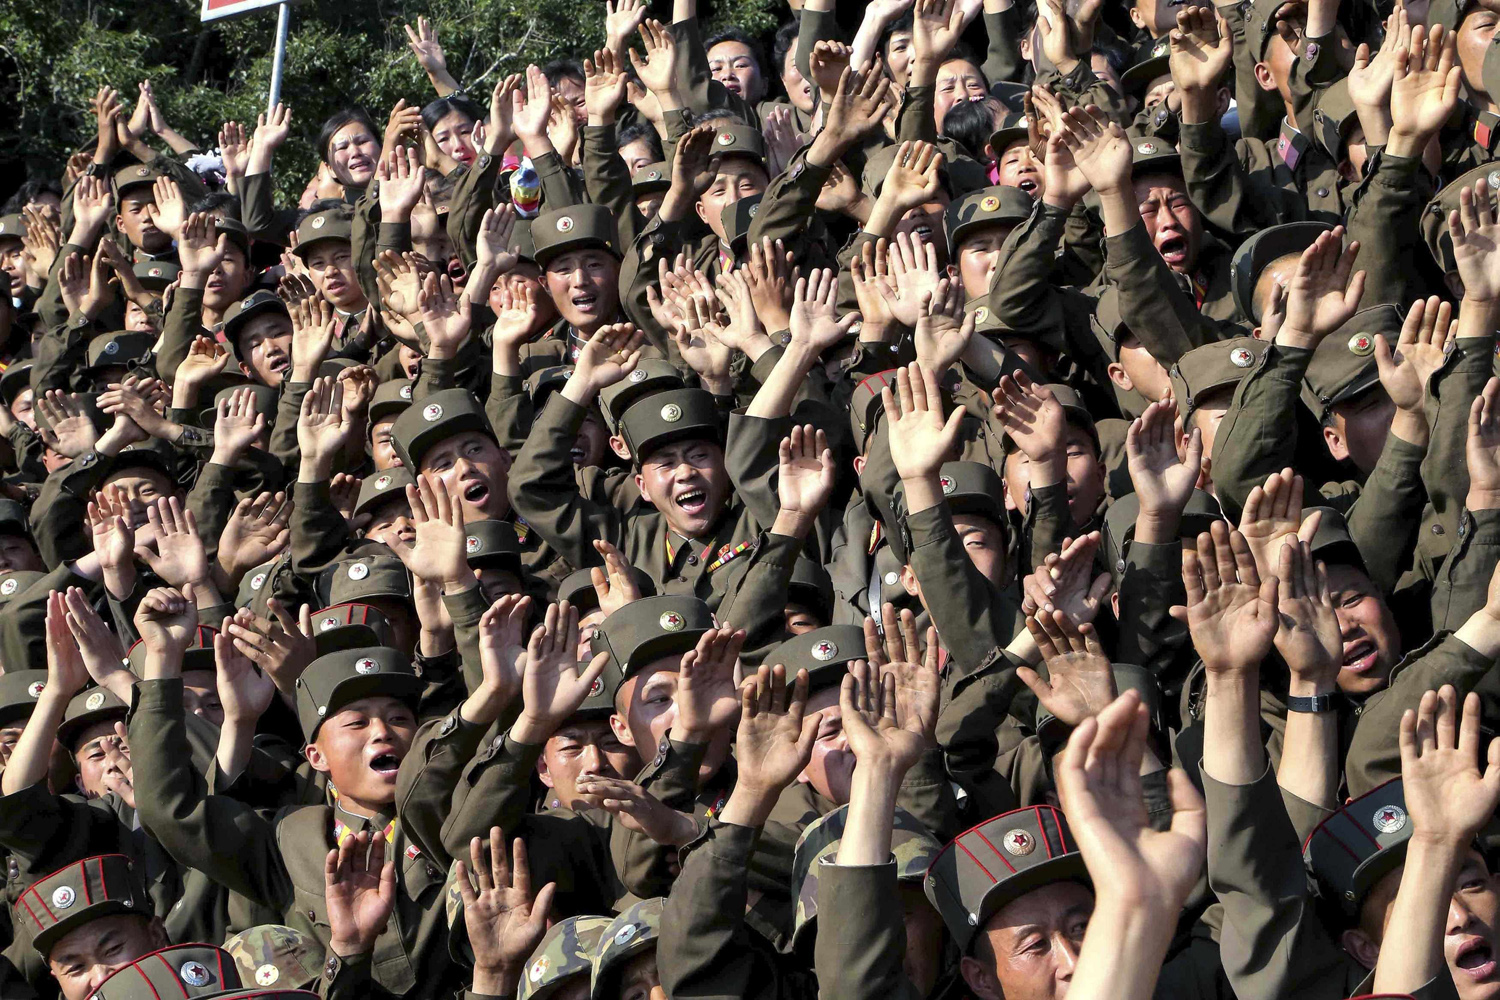 Soldiers wave during a visit by North Korean leader Kim to inspect the defence detachment on Ung Islet